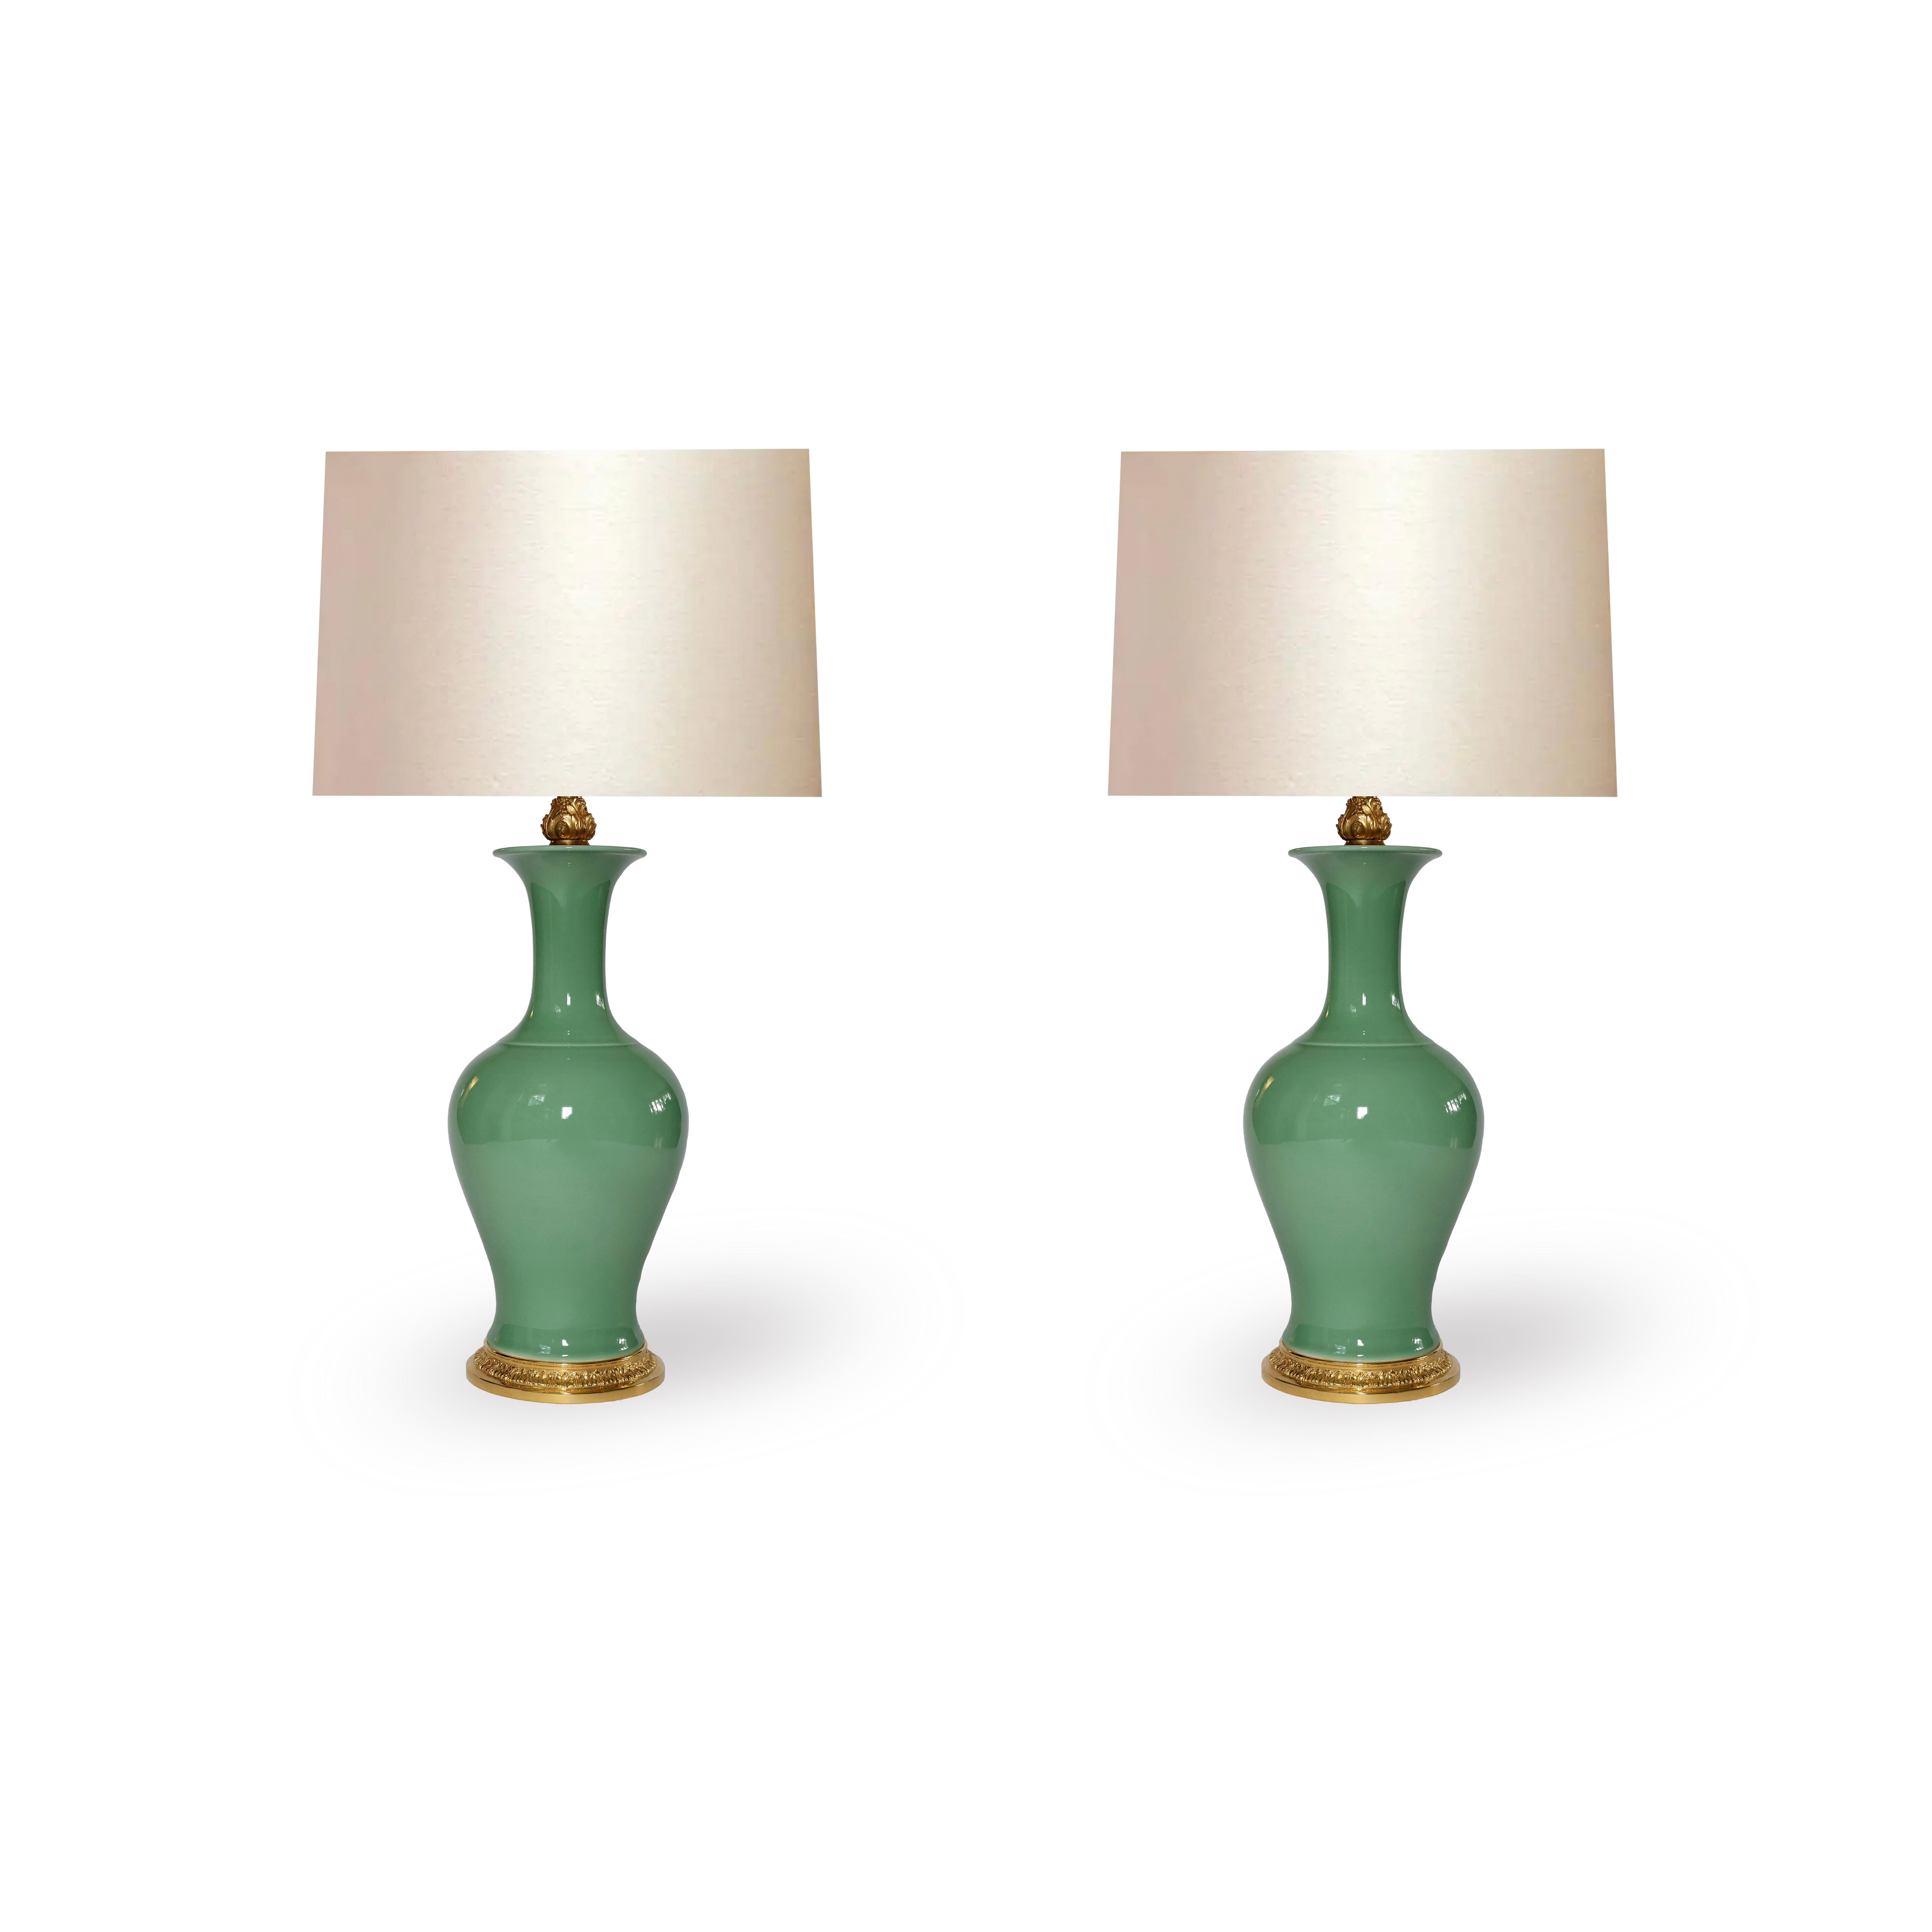 Pair of celadon glazed porcelain lamps with gilt brass decorations.
to the top of the porcelain 16 inch, 
lampshades are not included